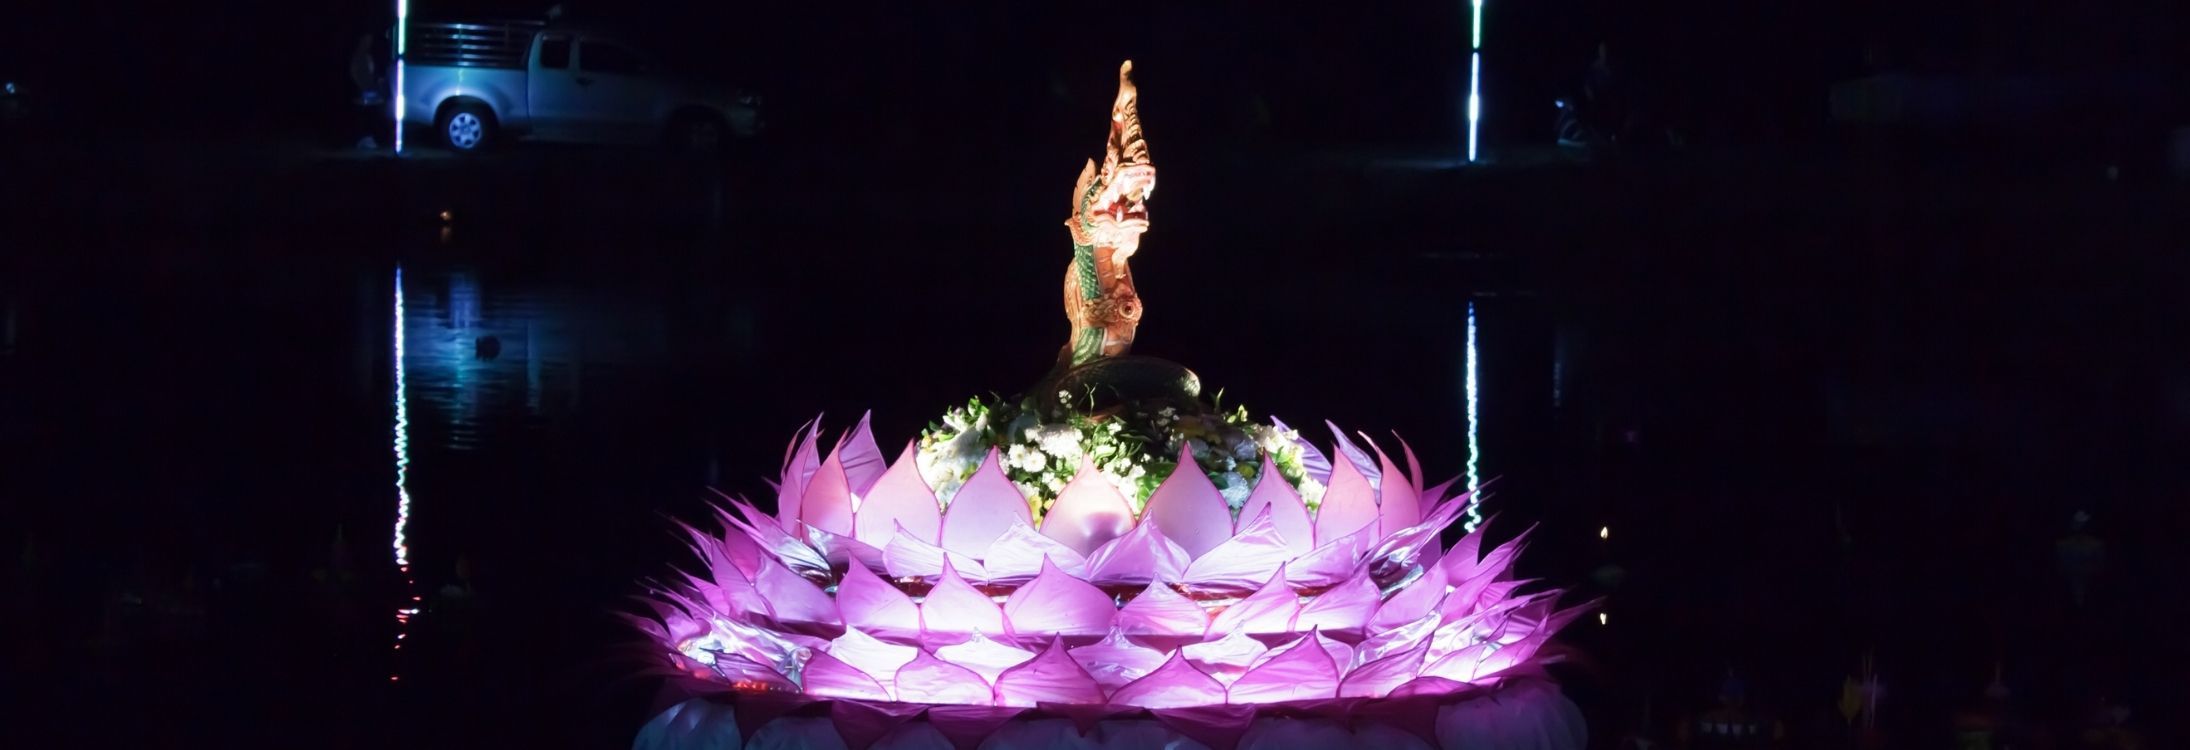 Unknown facts about the Loi Krathong festival 